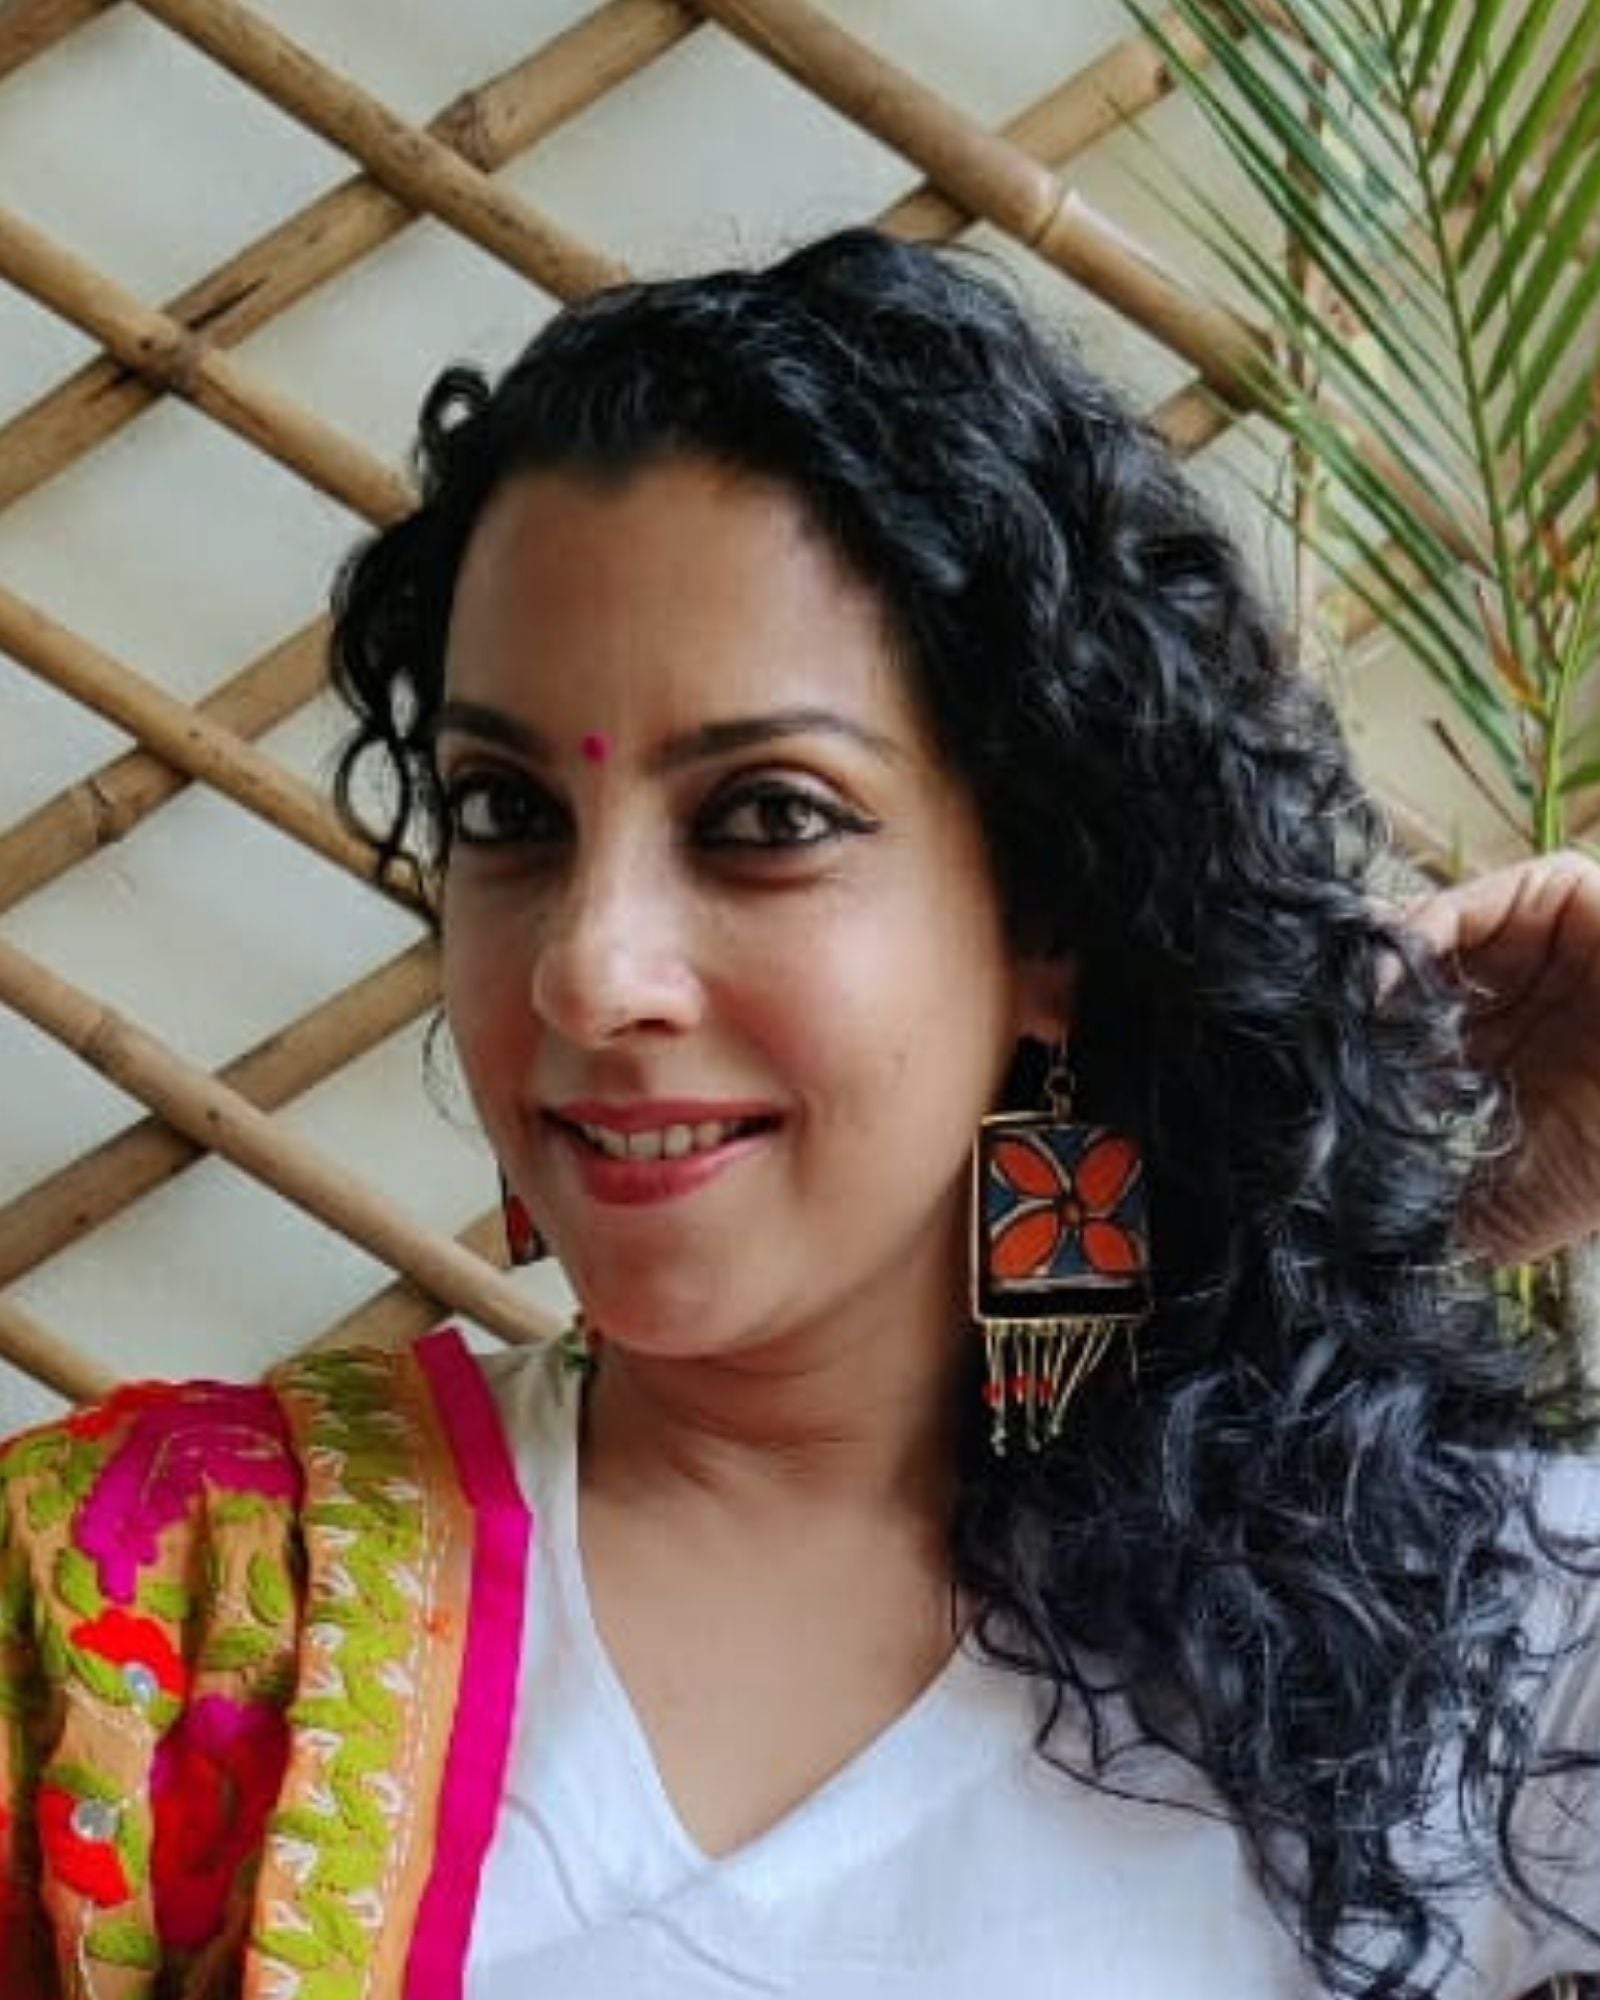 Mithila Tales Palash Upcycled Handmade Earrings 5 from our zero waste store